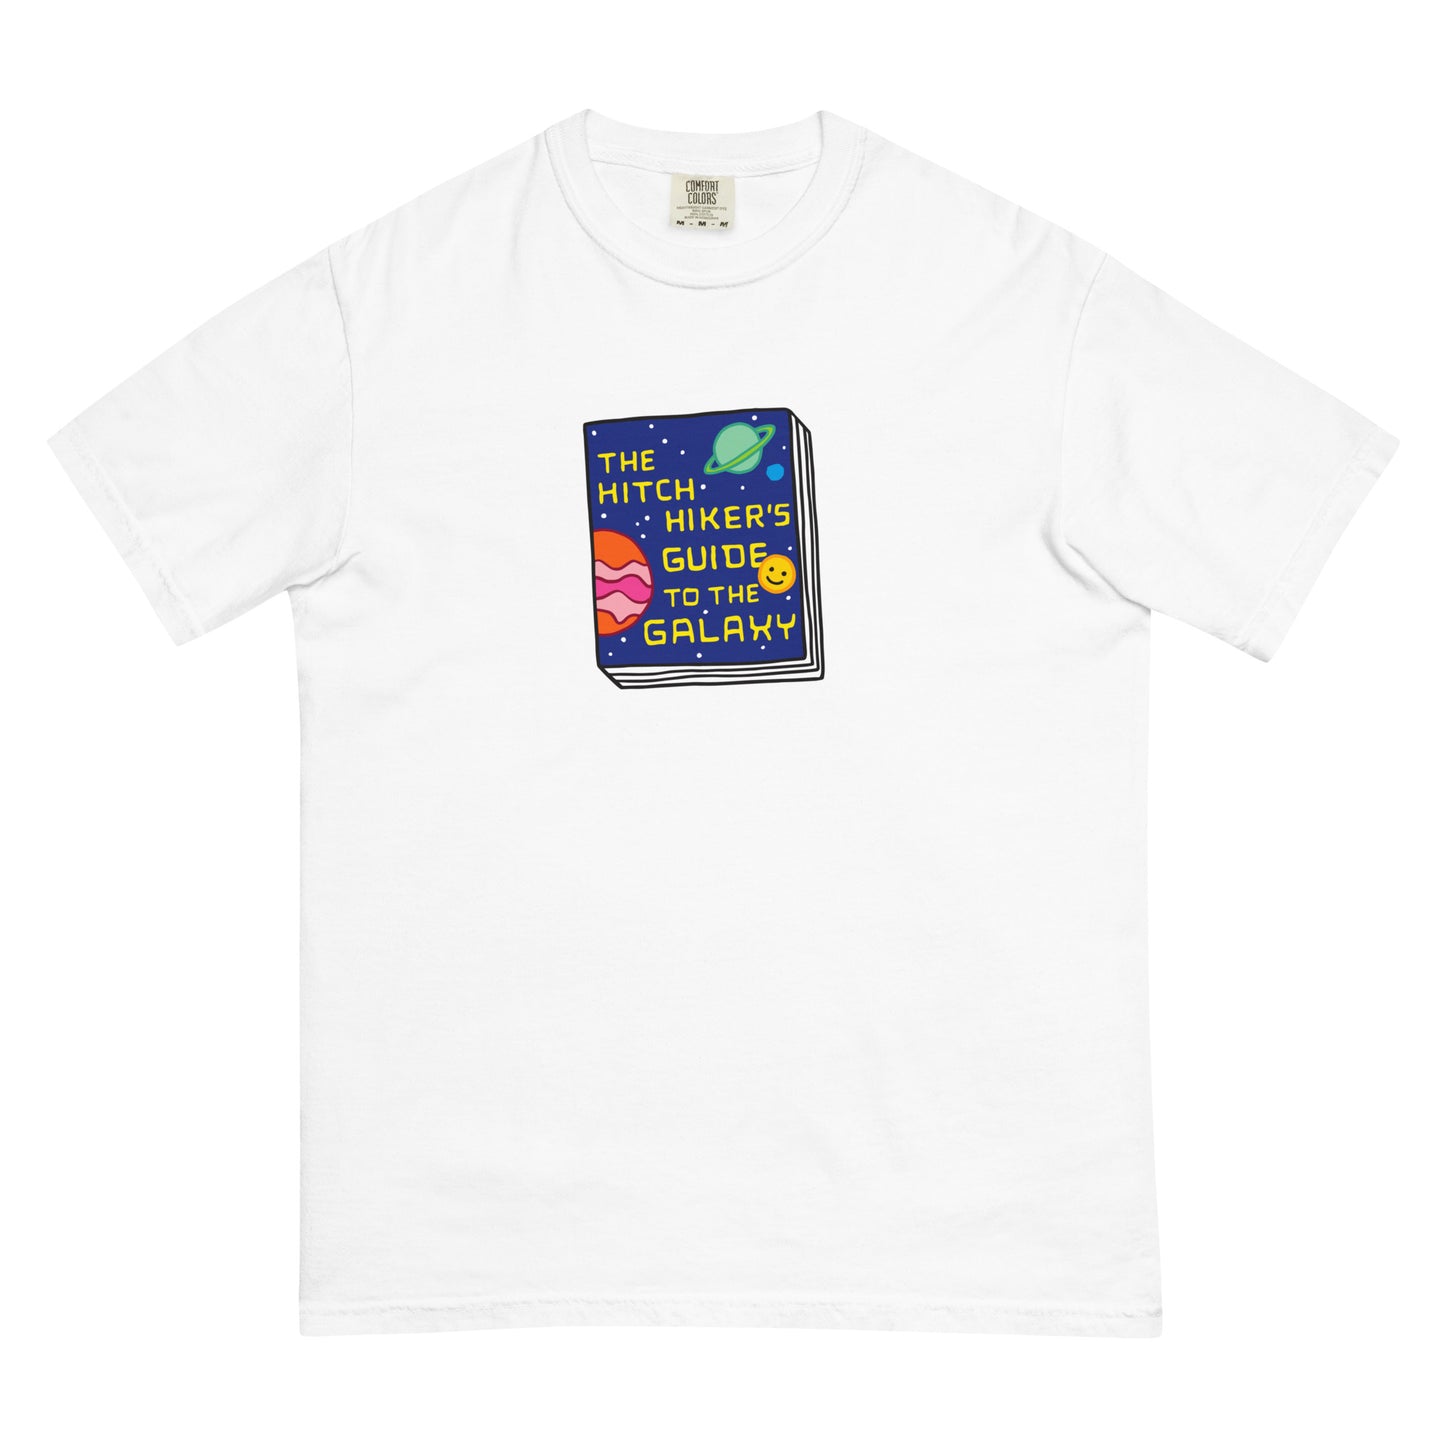 Book shirt: The Hitchhiker's Guide to the Galaxy